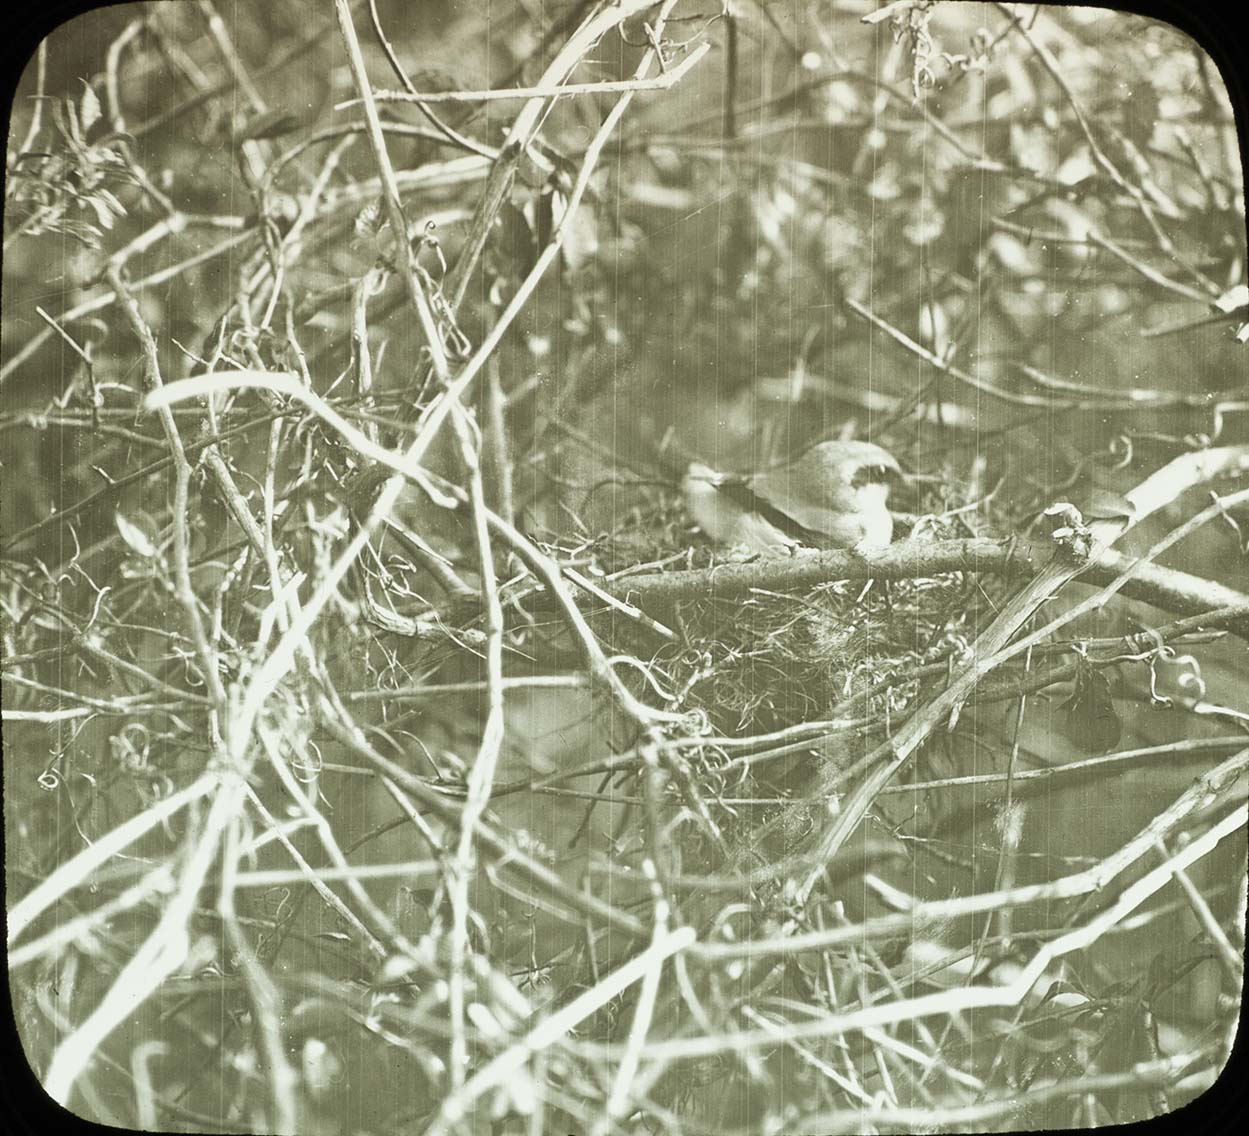 Lantern slide and photograph of a Migrant Shrike sitting on a nest